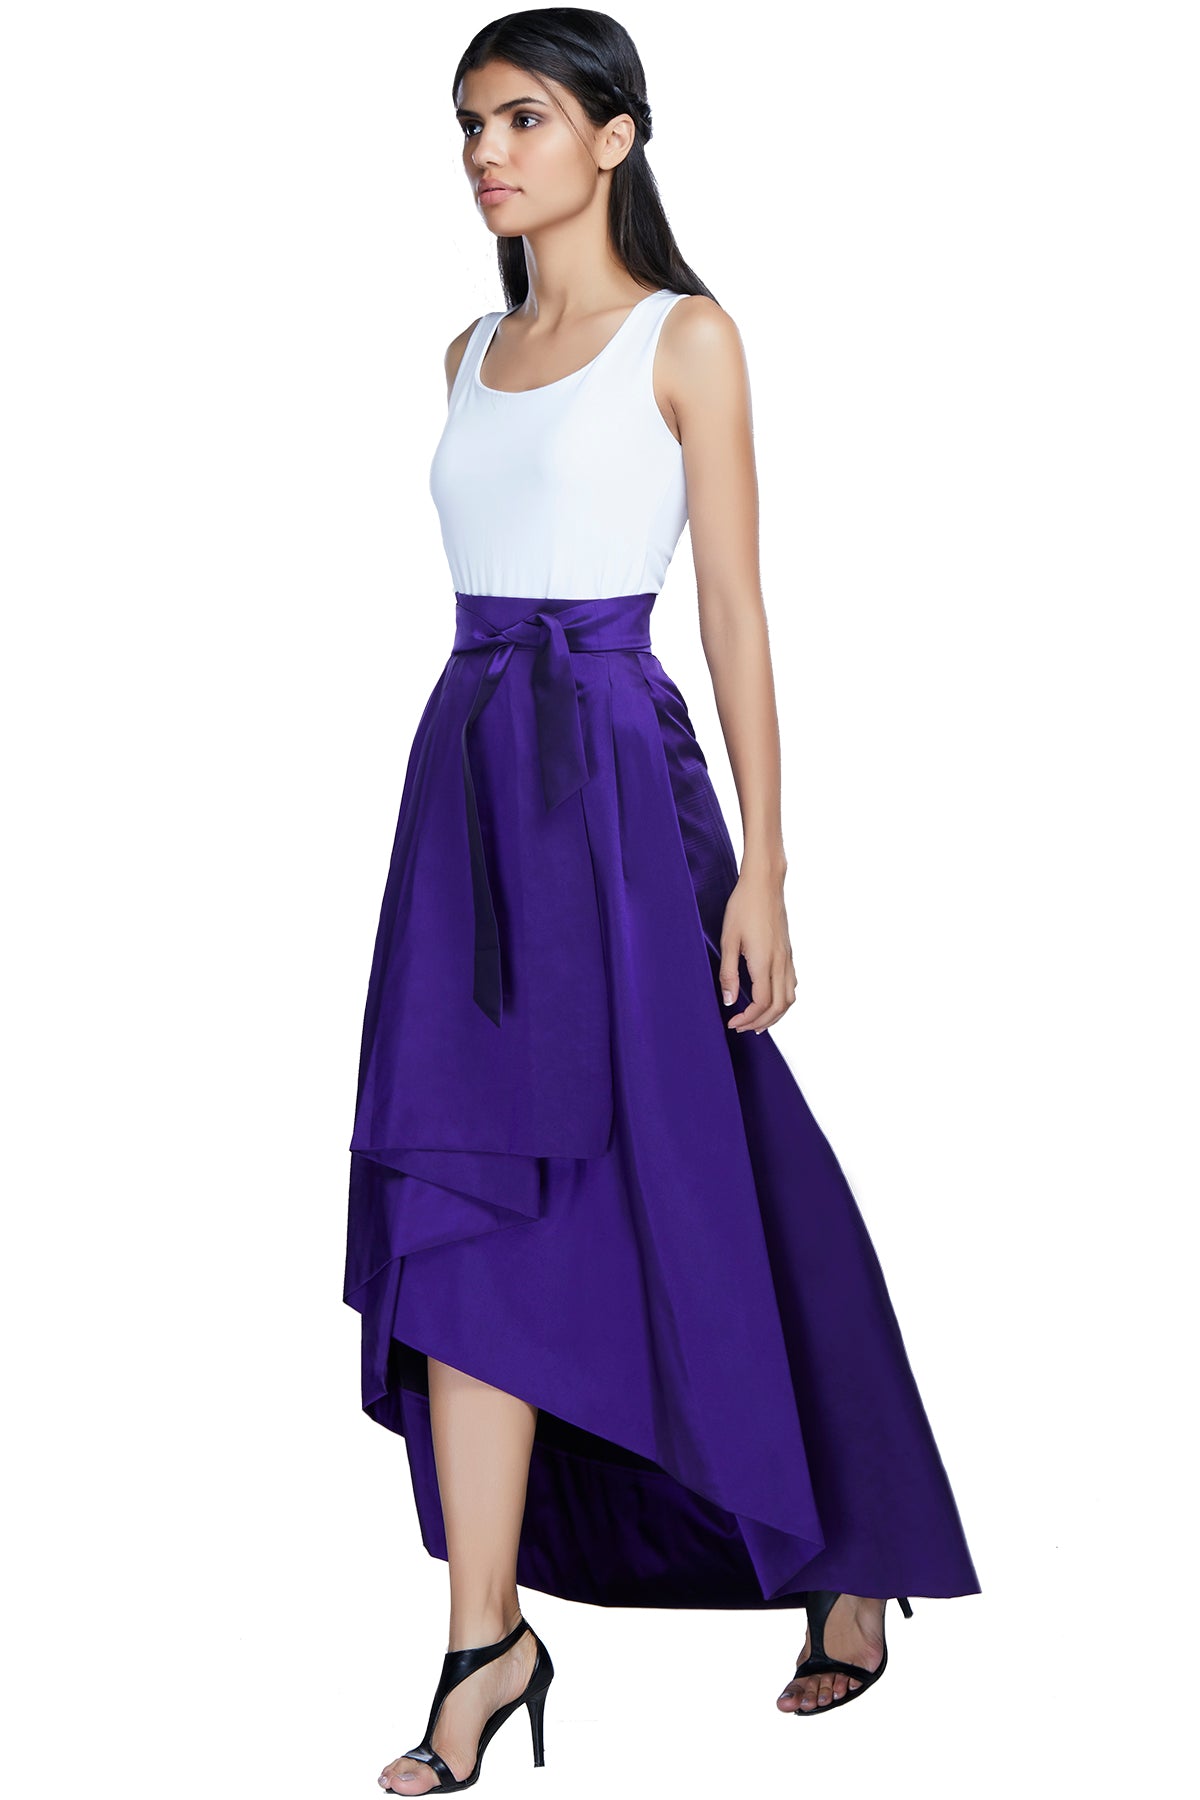 Tease your mood in this sometimes up, sometimes down purple hi-low skirt with a front bow and box pleats.
